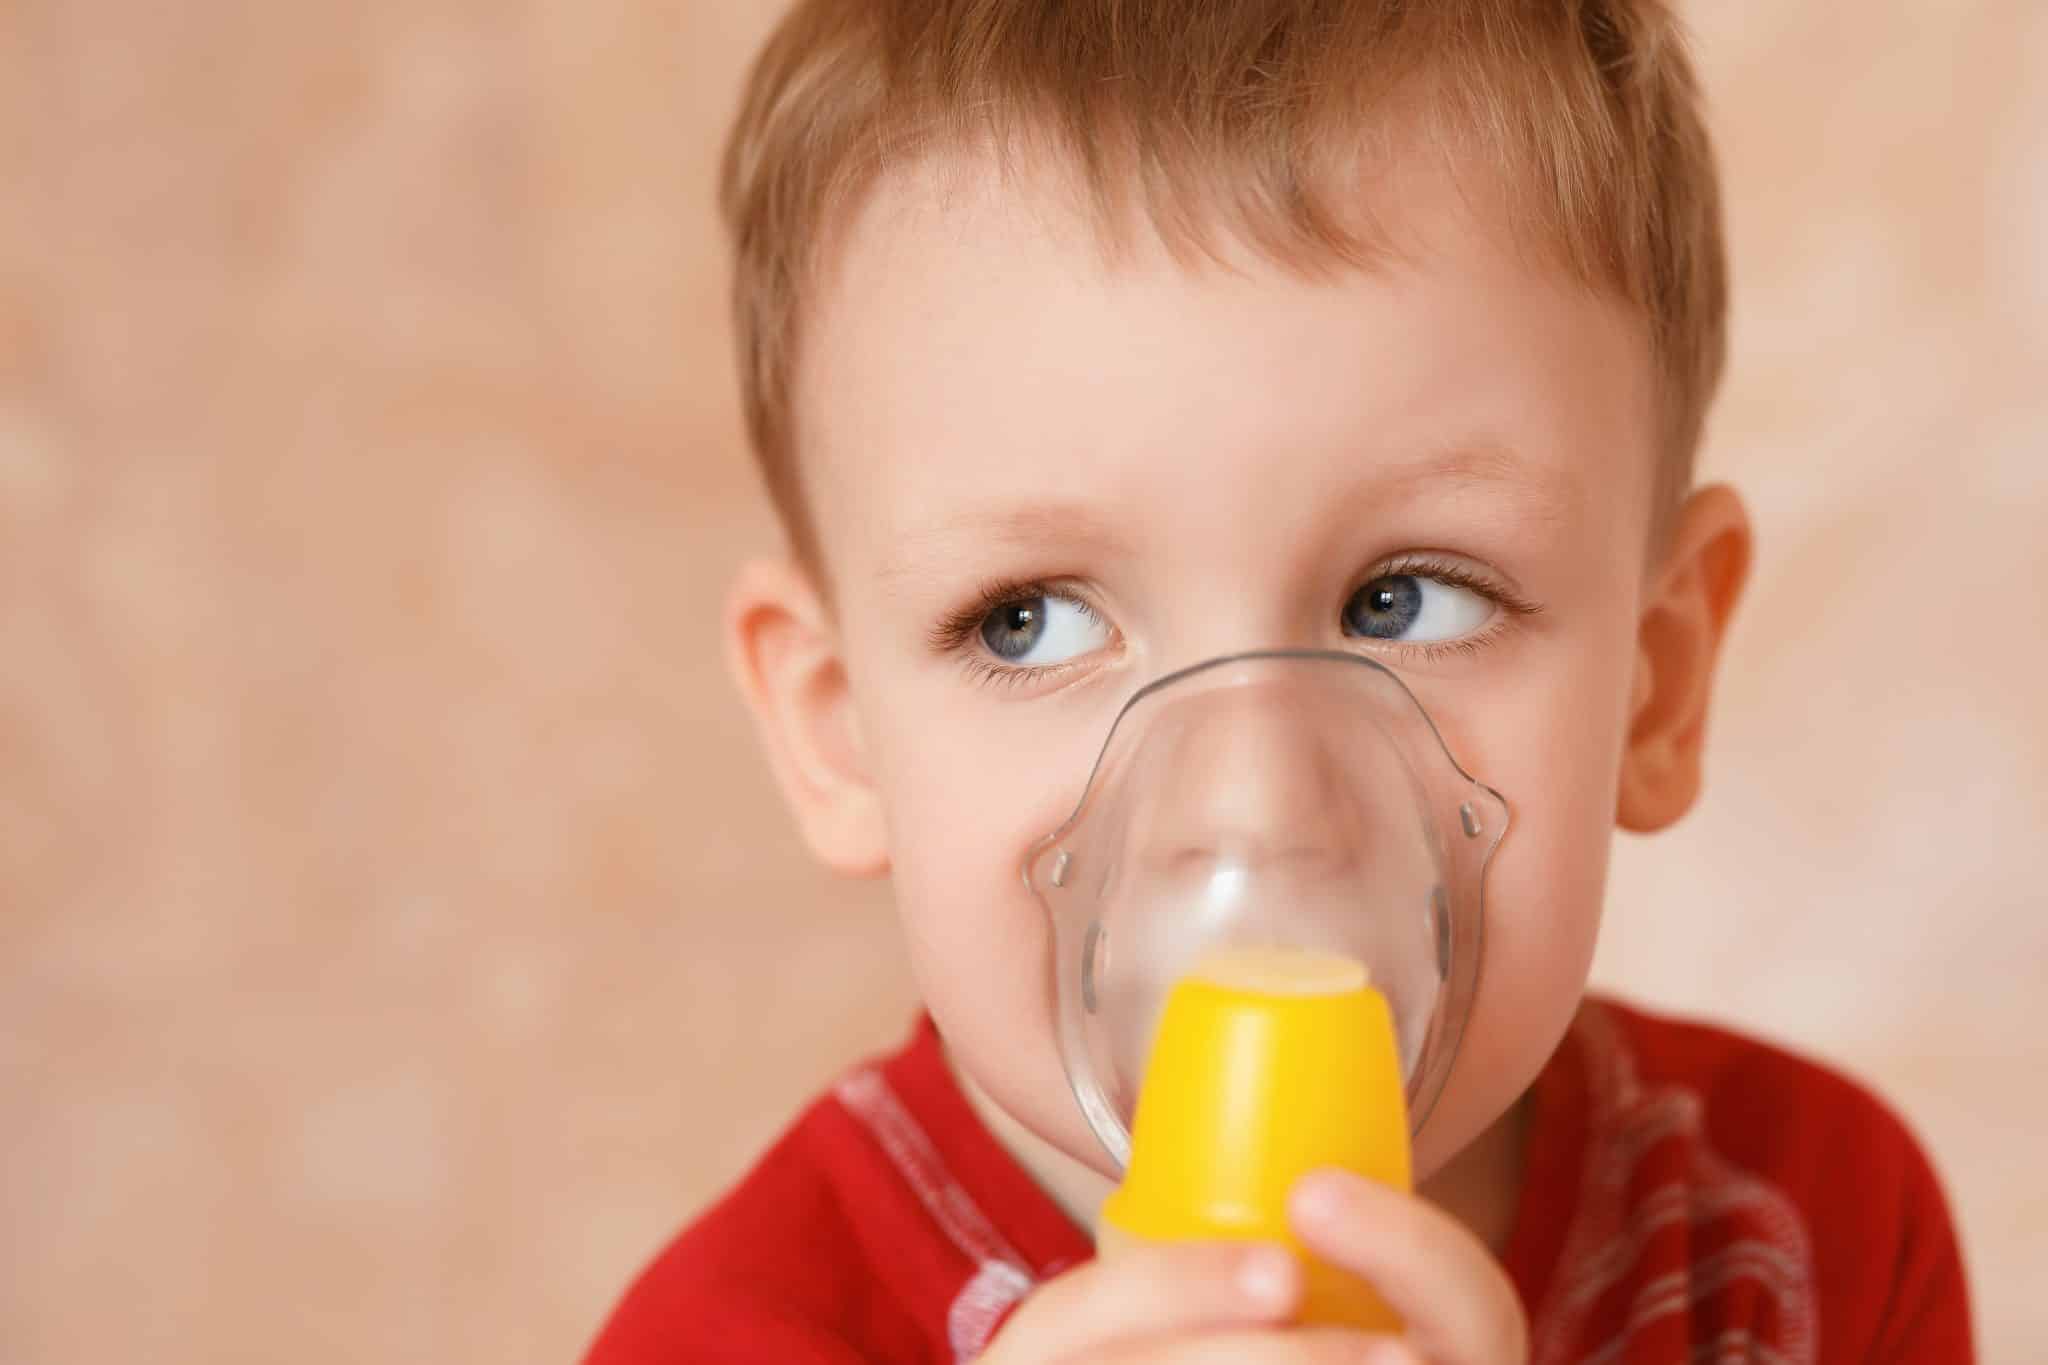 Young boy using a breathing treatment due to his care of croup